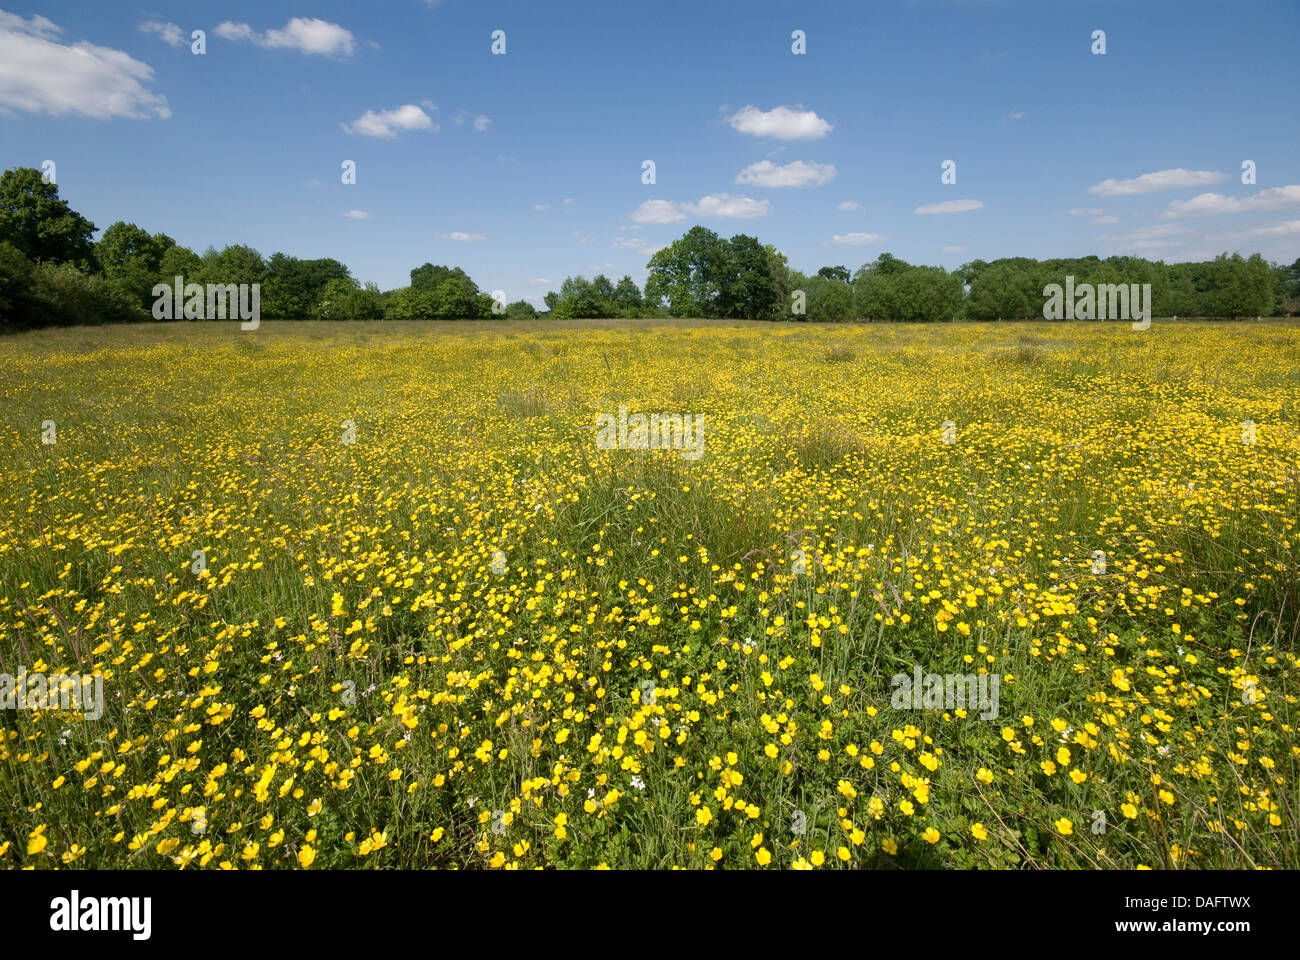 tall buttercup, upright meadow crowfoot (Ranunculus acris), flower meadow with buttercup, Germany, North Rhine-Westphalia, Verl Stock Photo